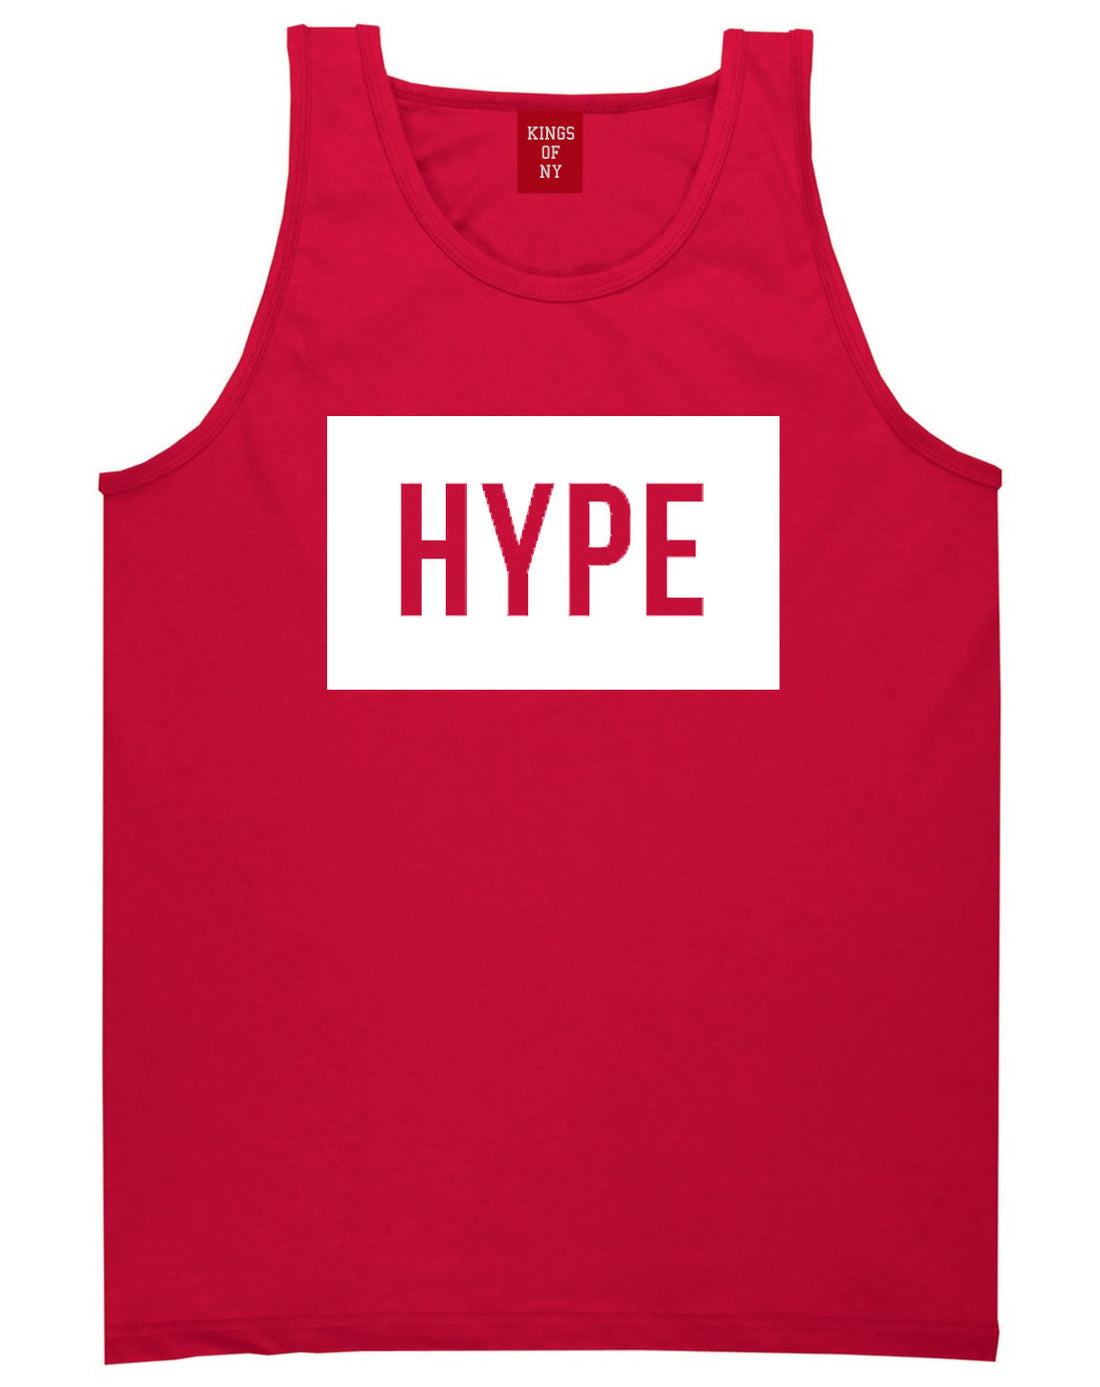 Hype Style Streetwear Brand Logo White by Kings Of NY Tank Top In Red by Kings Of NY